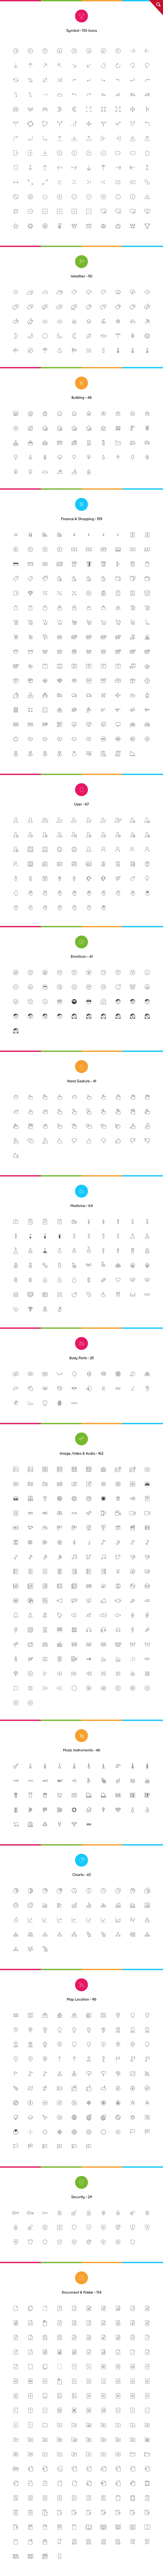 Big bundle of 2061 different nano line icons into 30+ categories on a white background.